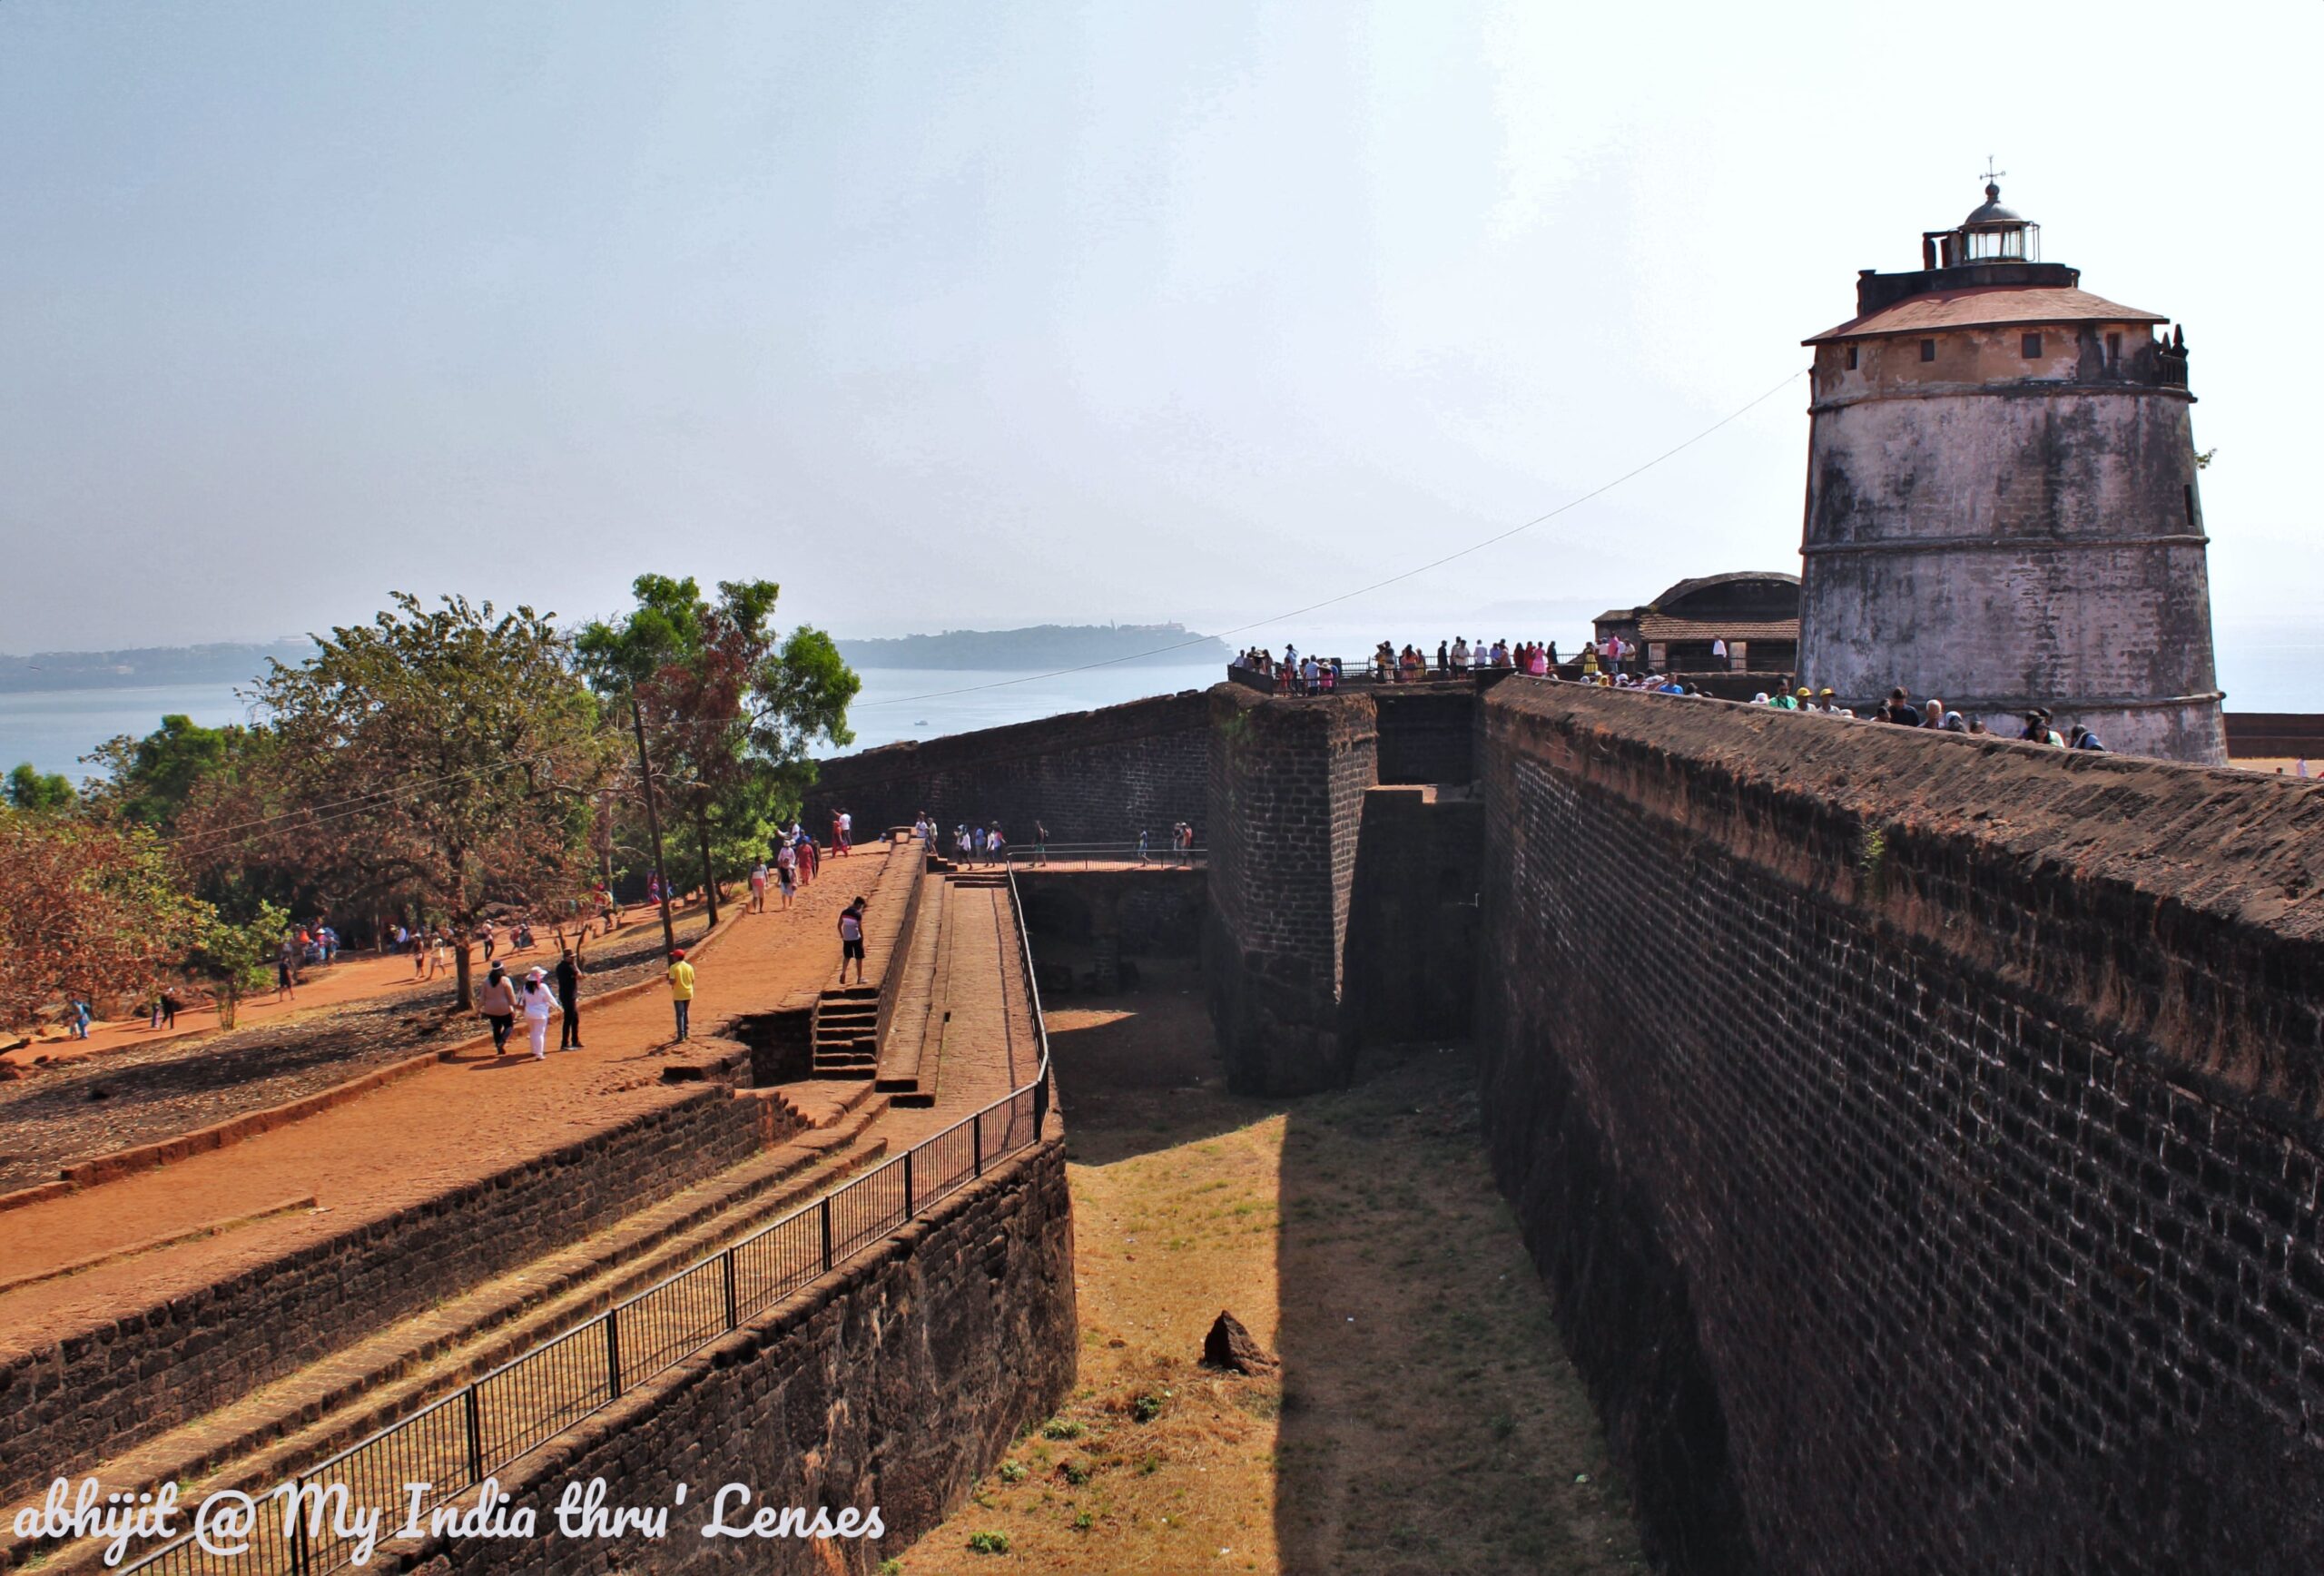 The dry moat at the entrance of the Aguada Fort